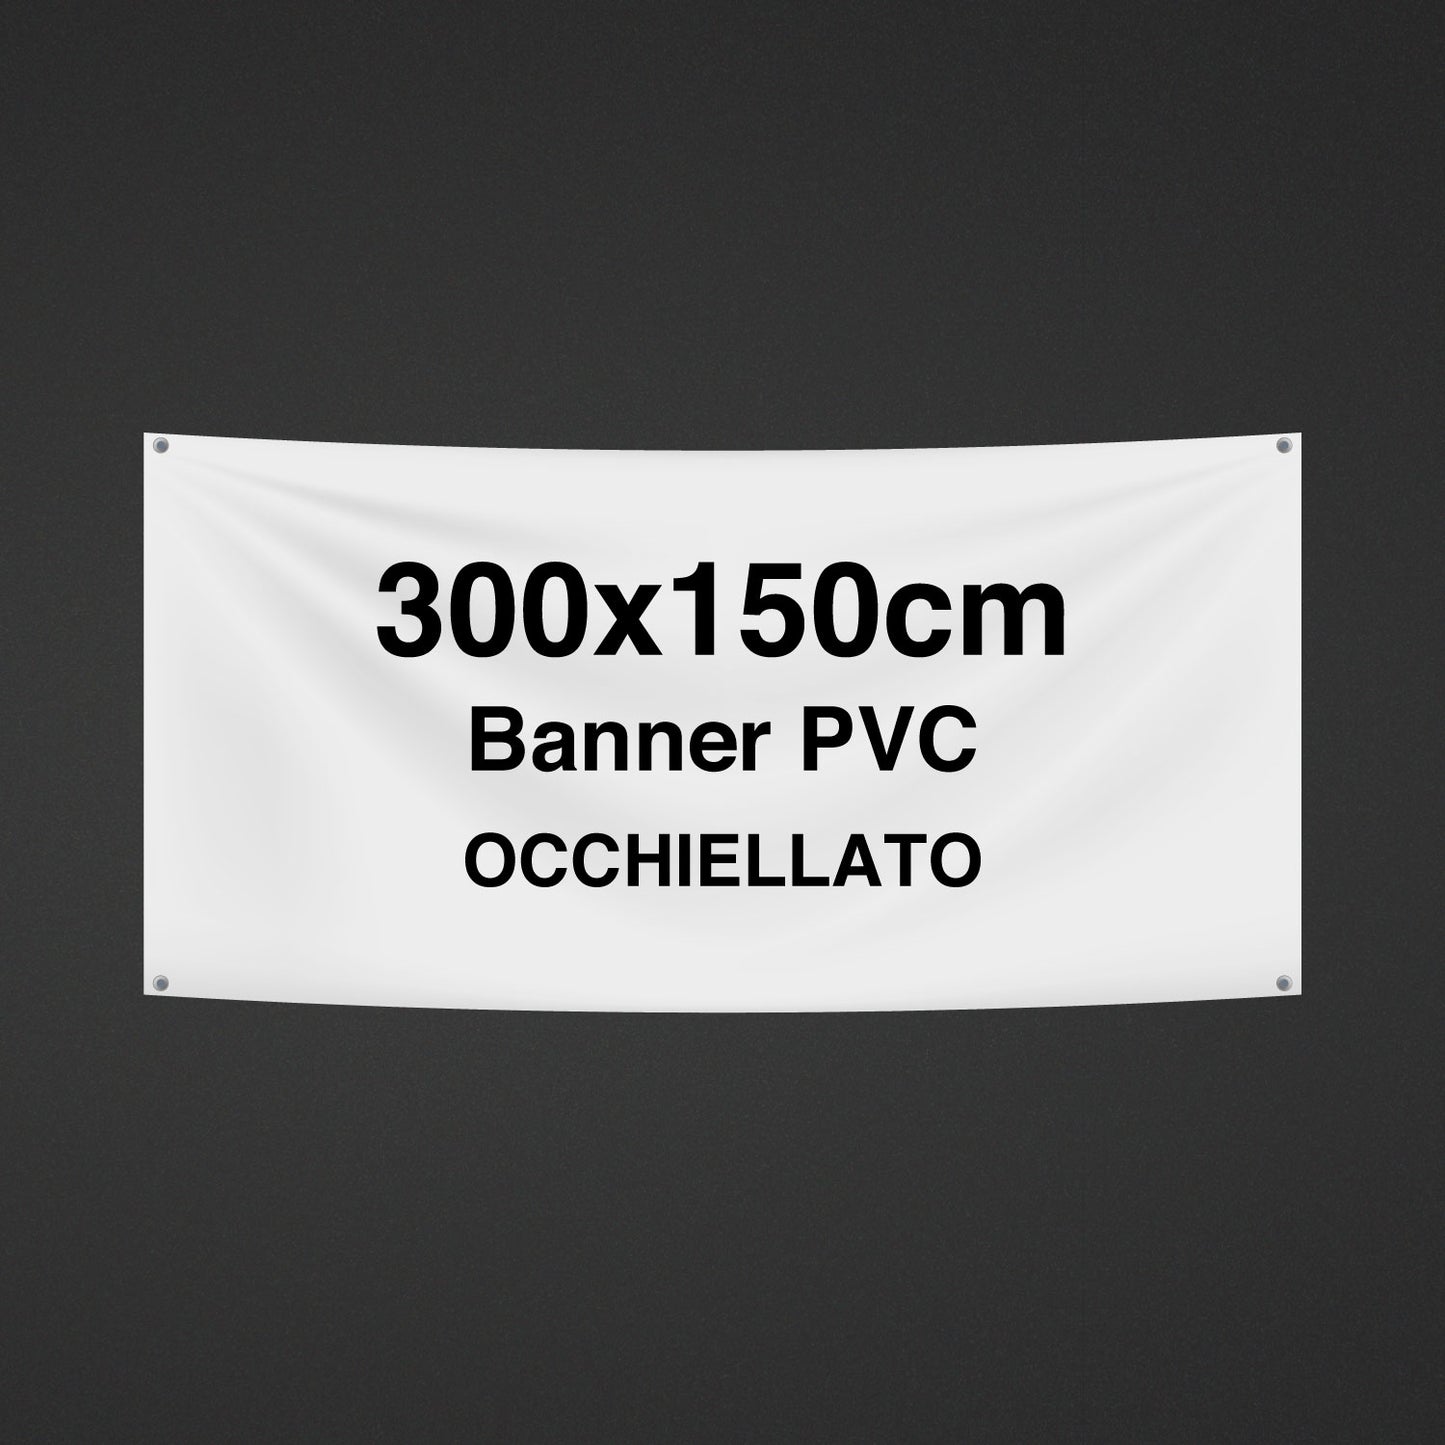 Eyelet and Reinforced PVC Banners